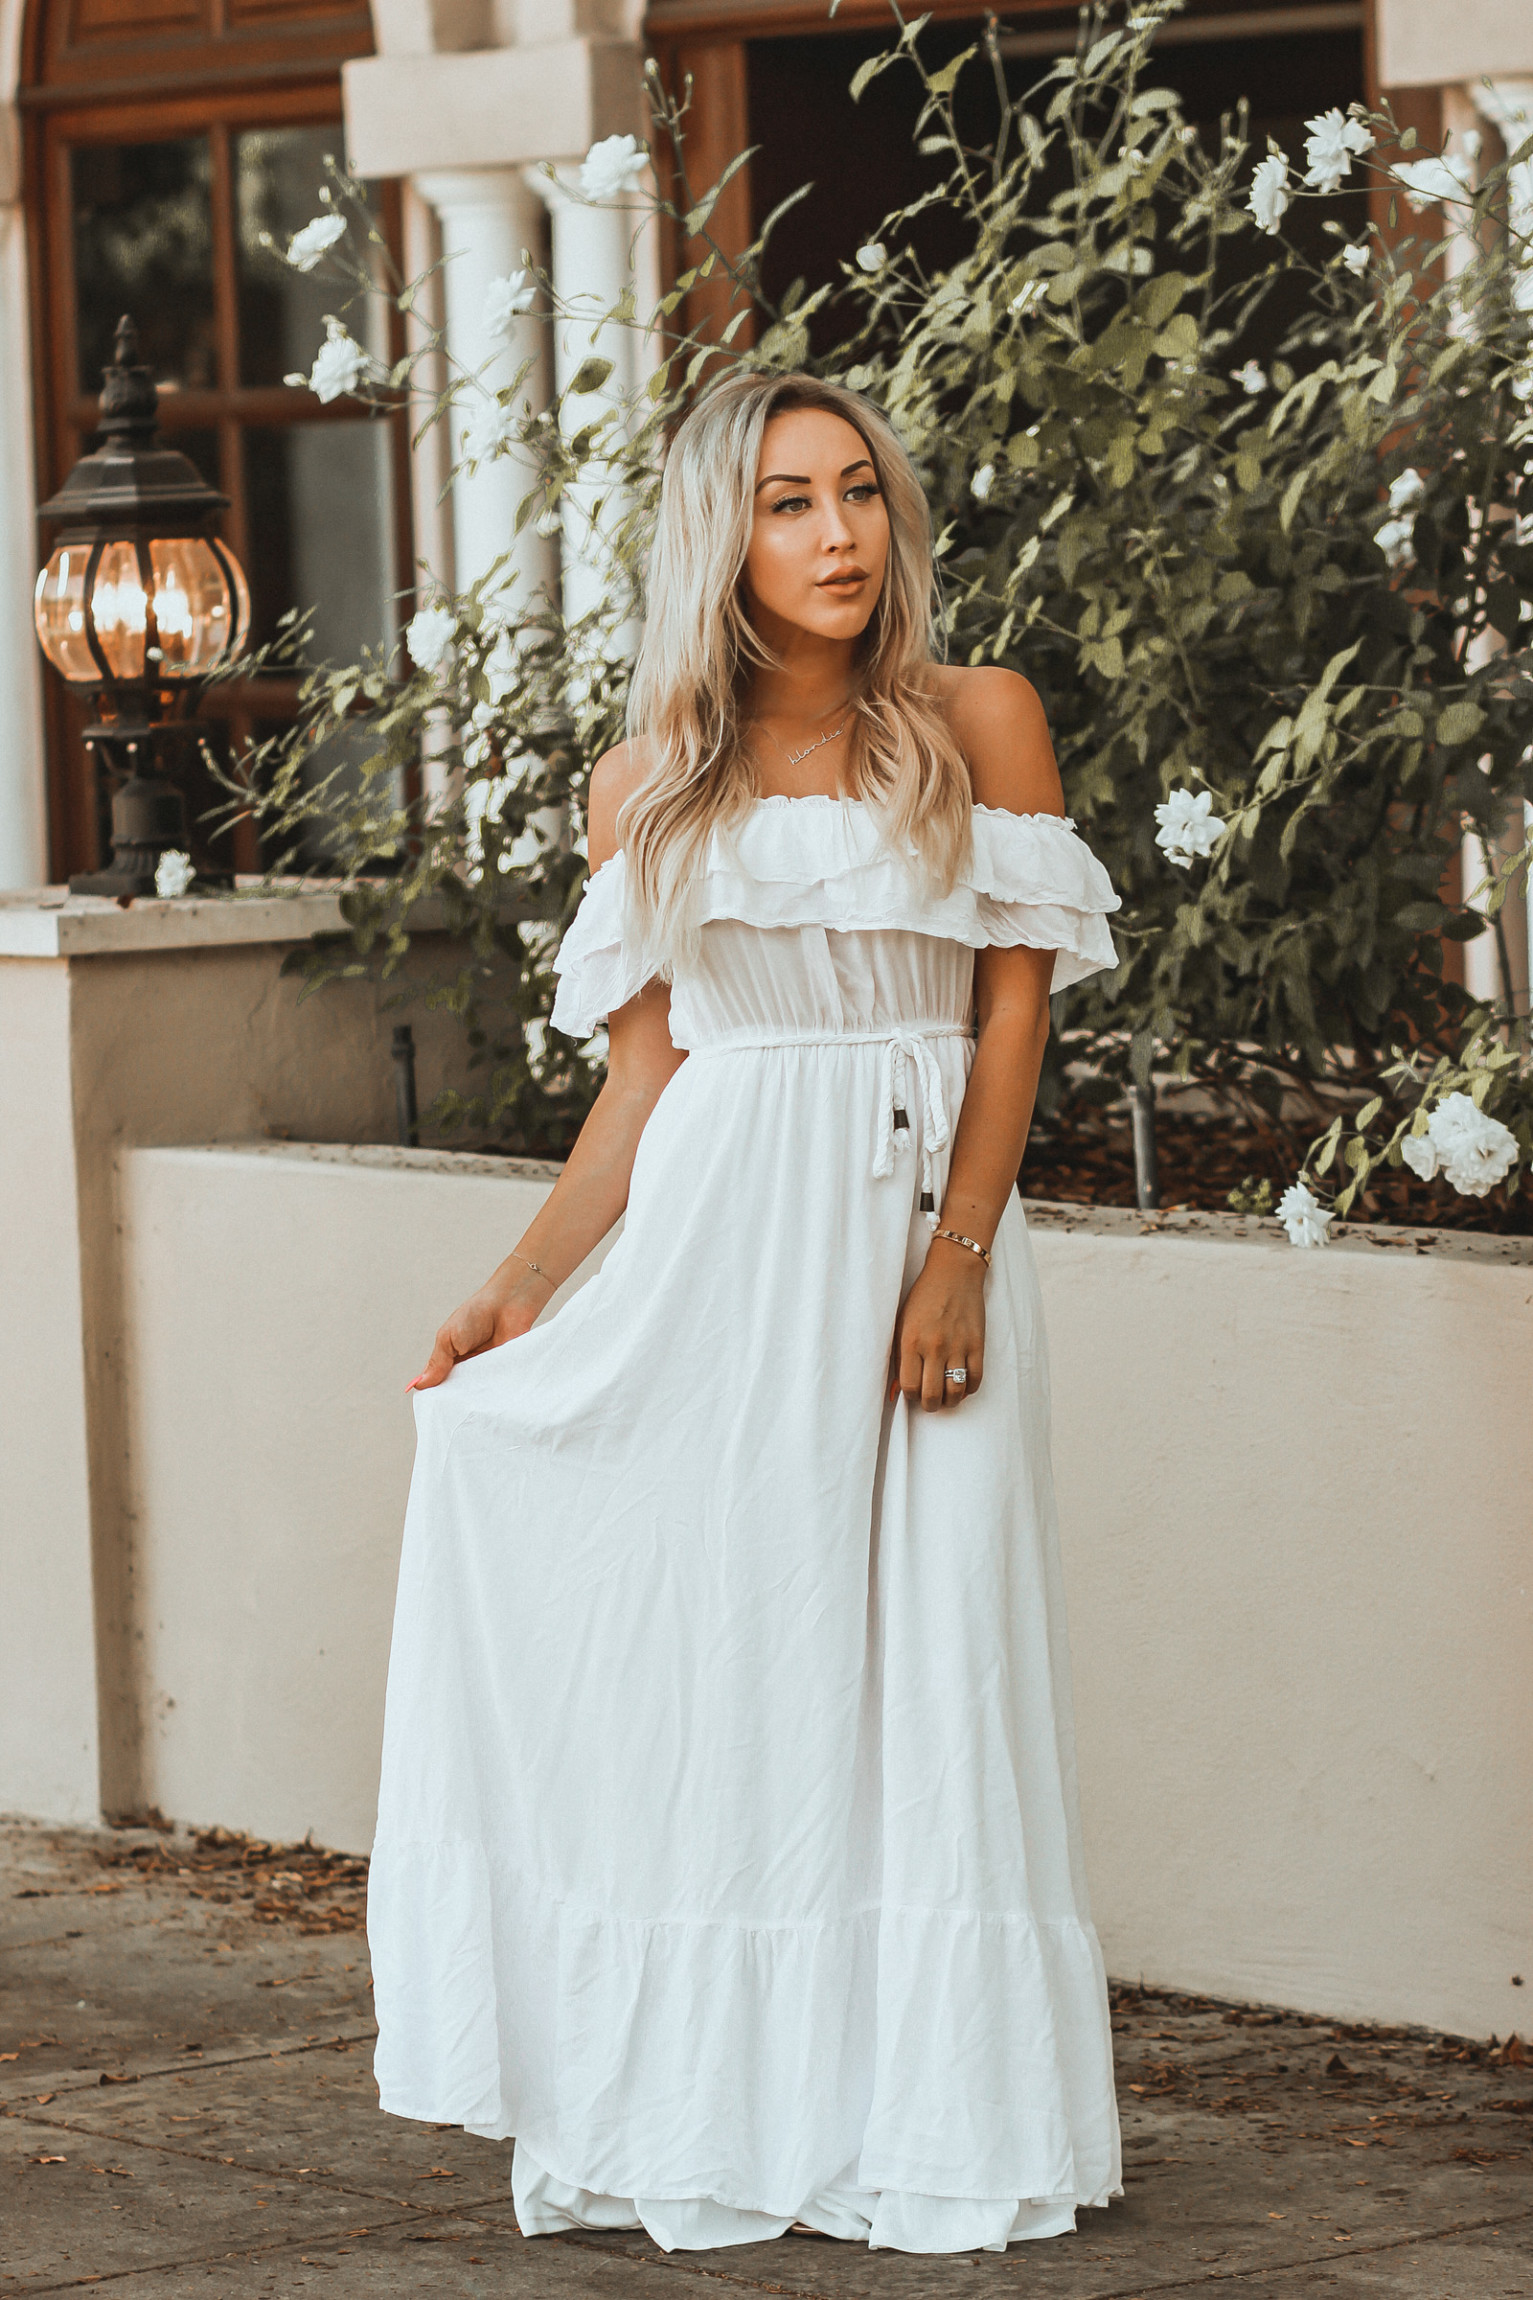 White Bohemian Maxi Dress | Bride-to-be Dress | White Dress for Bridal Shower | Blondie in the City by Hayley Larue